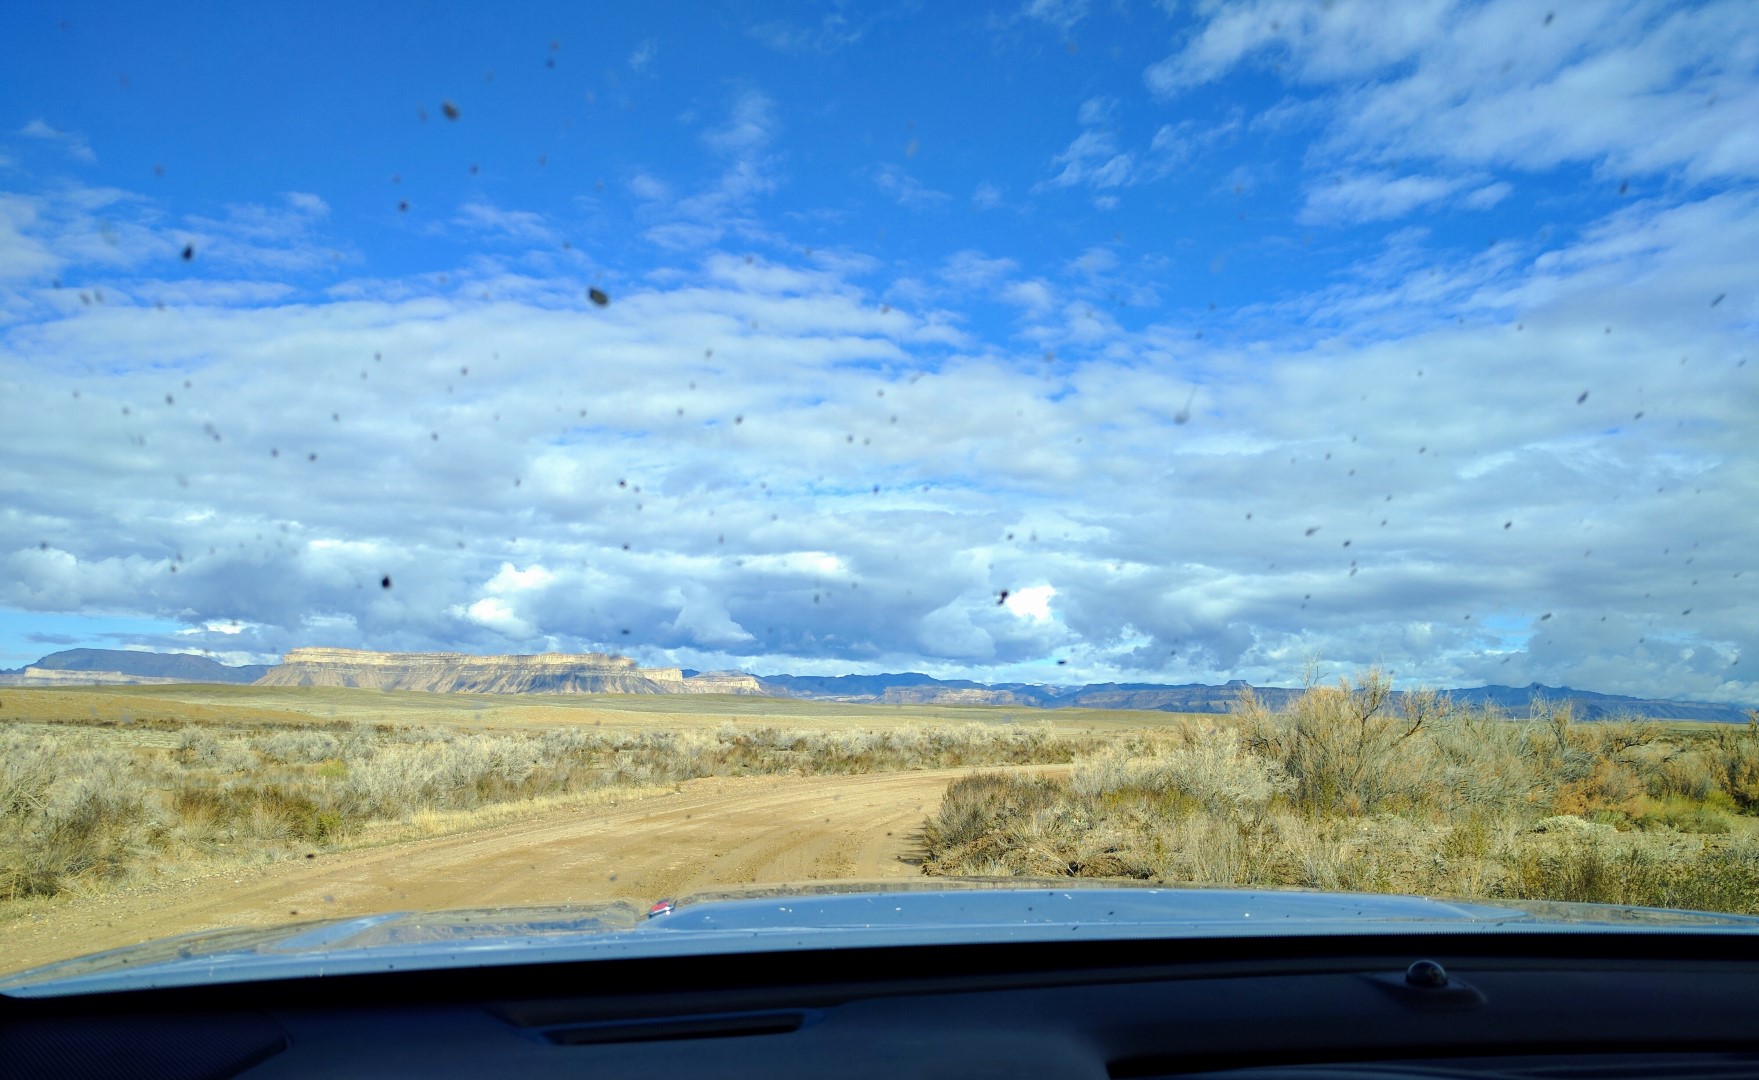 I-70 comes into view through the mud-spattered windshield